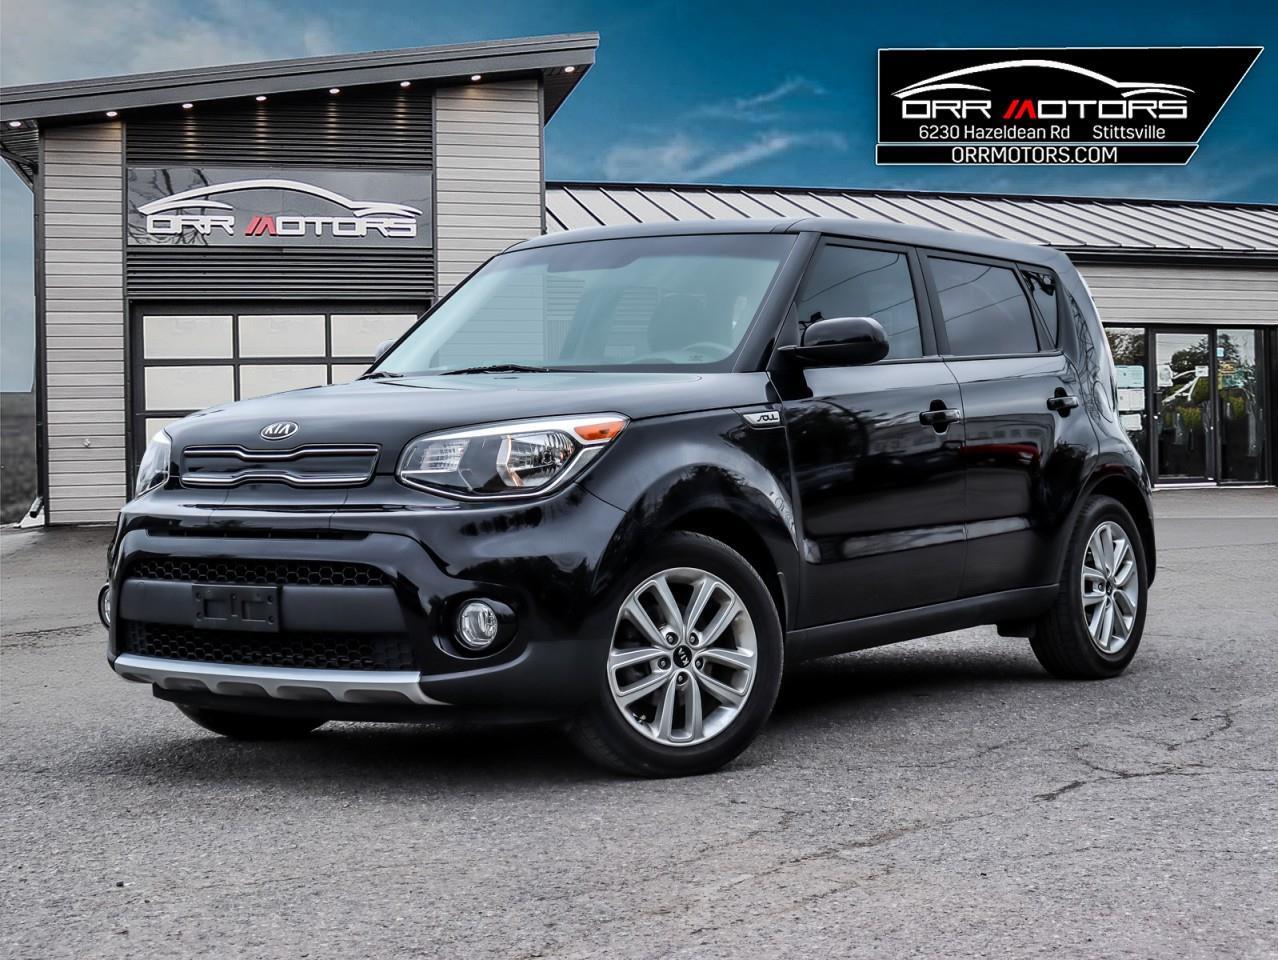 2017 Kia Soul EX AVAILABLE NOW! CALL NOW TO BOOK YOUR TEST DRIVE